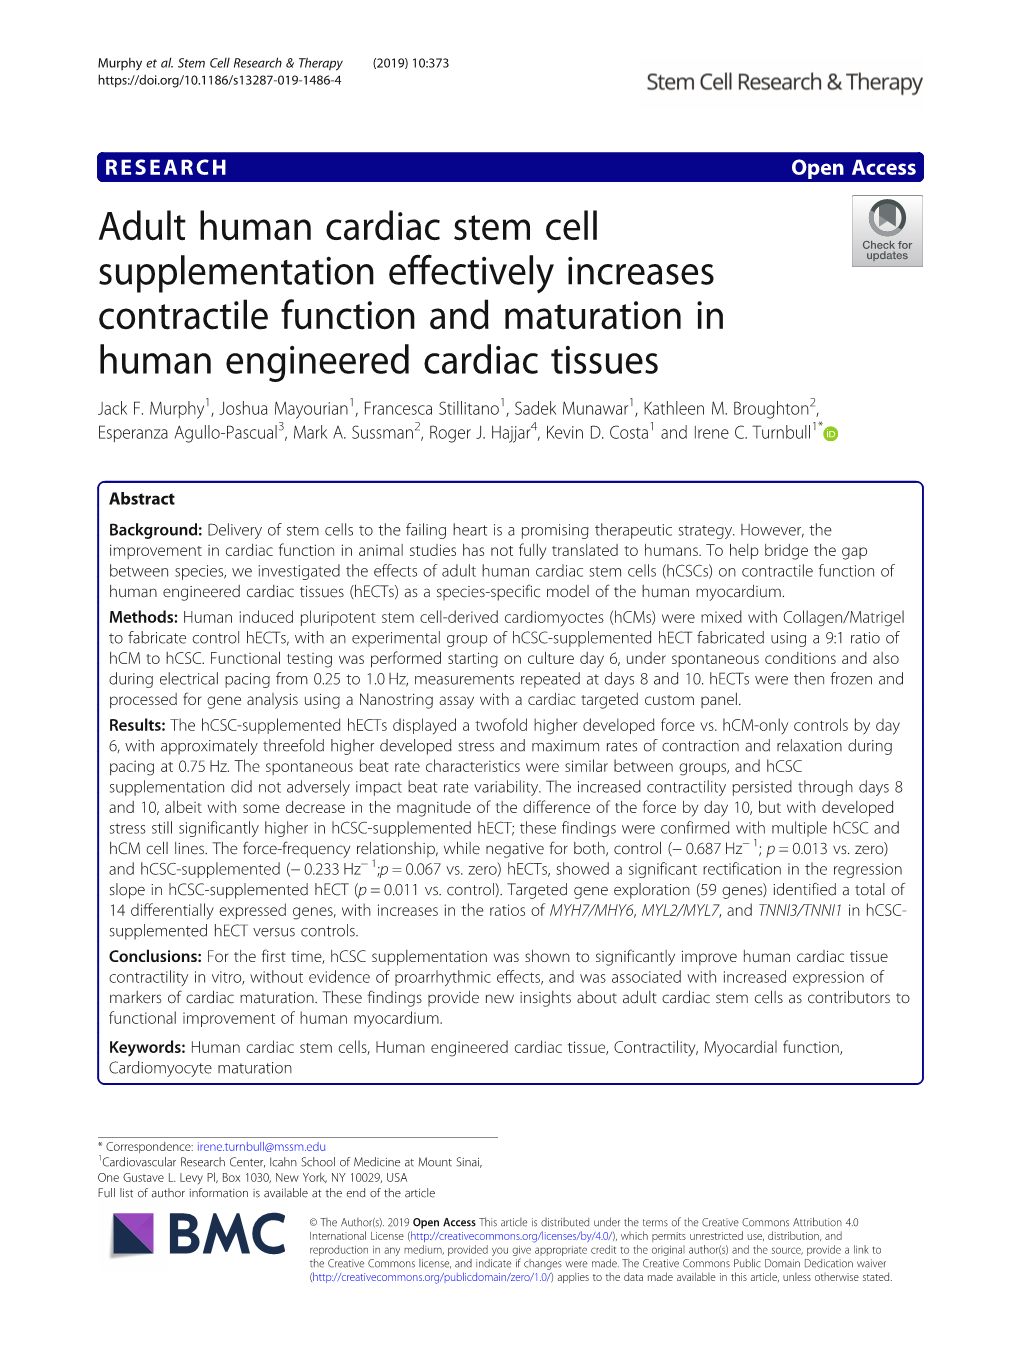 Adult Human Cardiac Stem Cell Supplementation Effectively Increases Contractile Function and Maturation in Human Engineered Cardiac Tissues Jack F